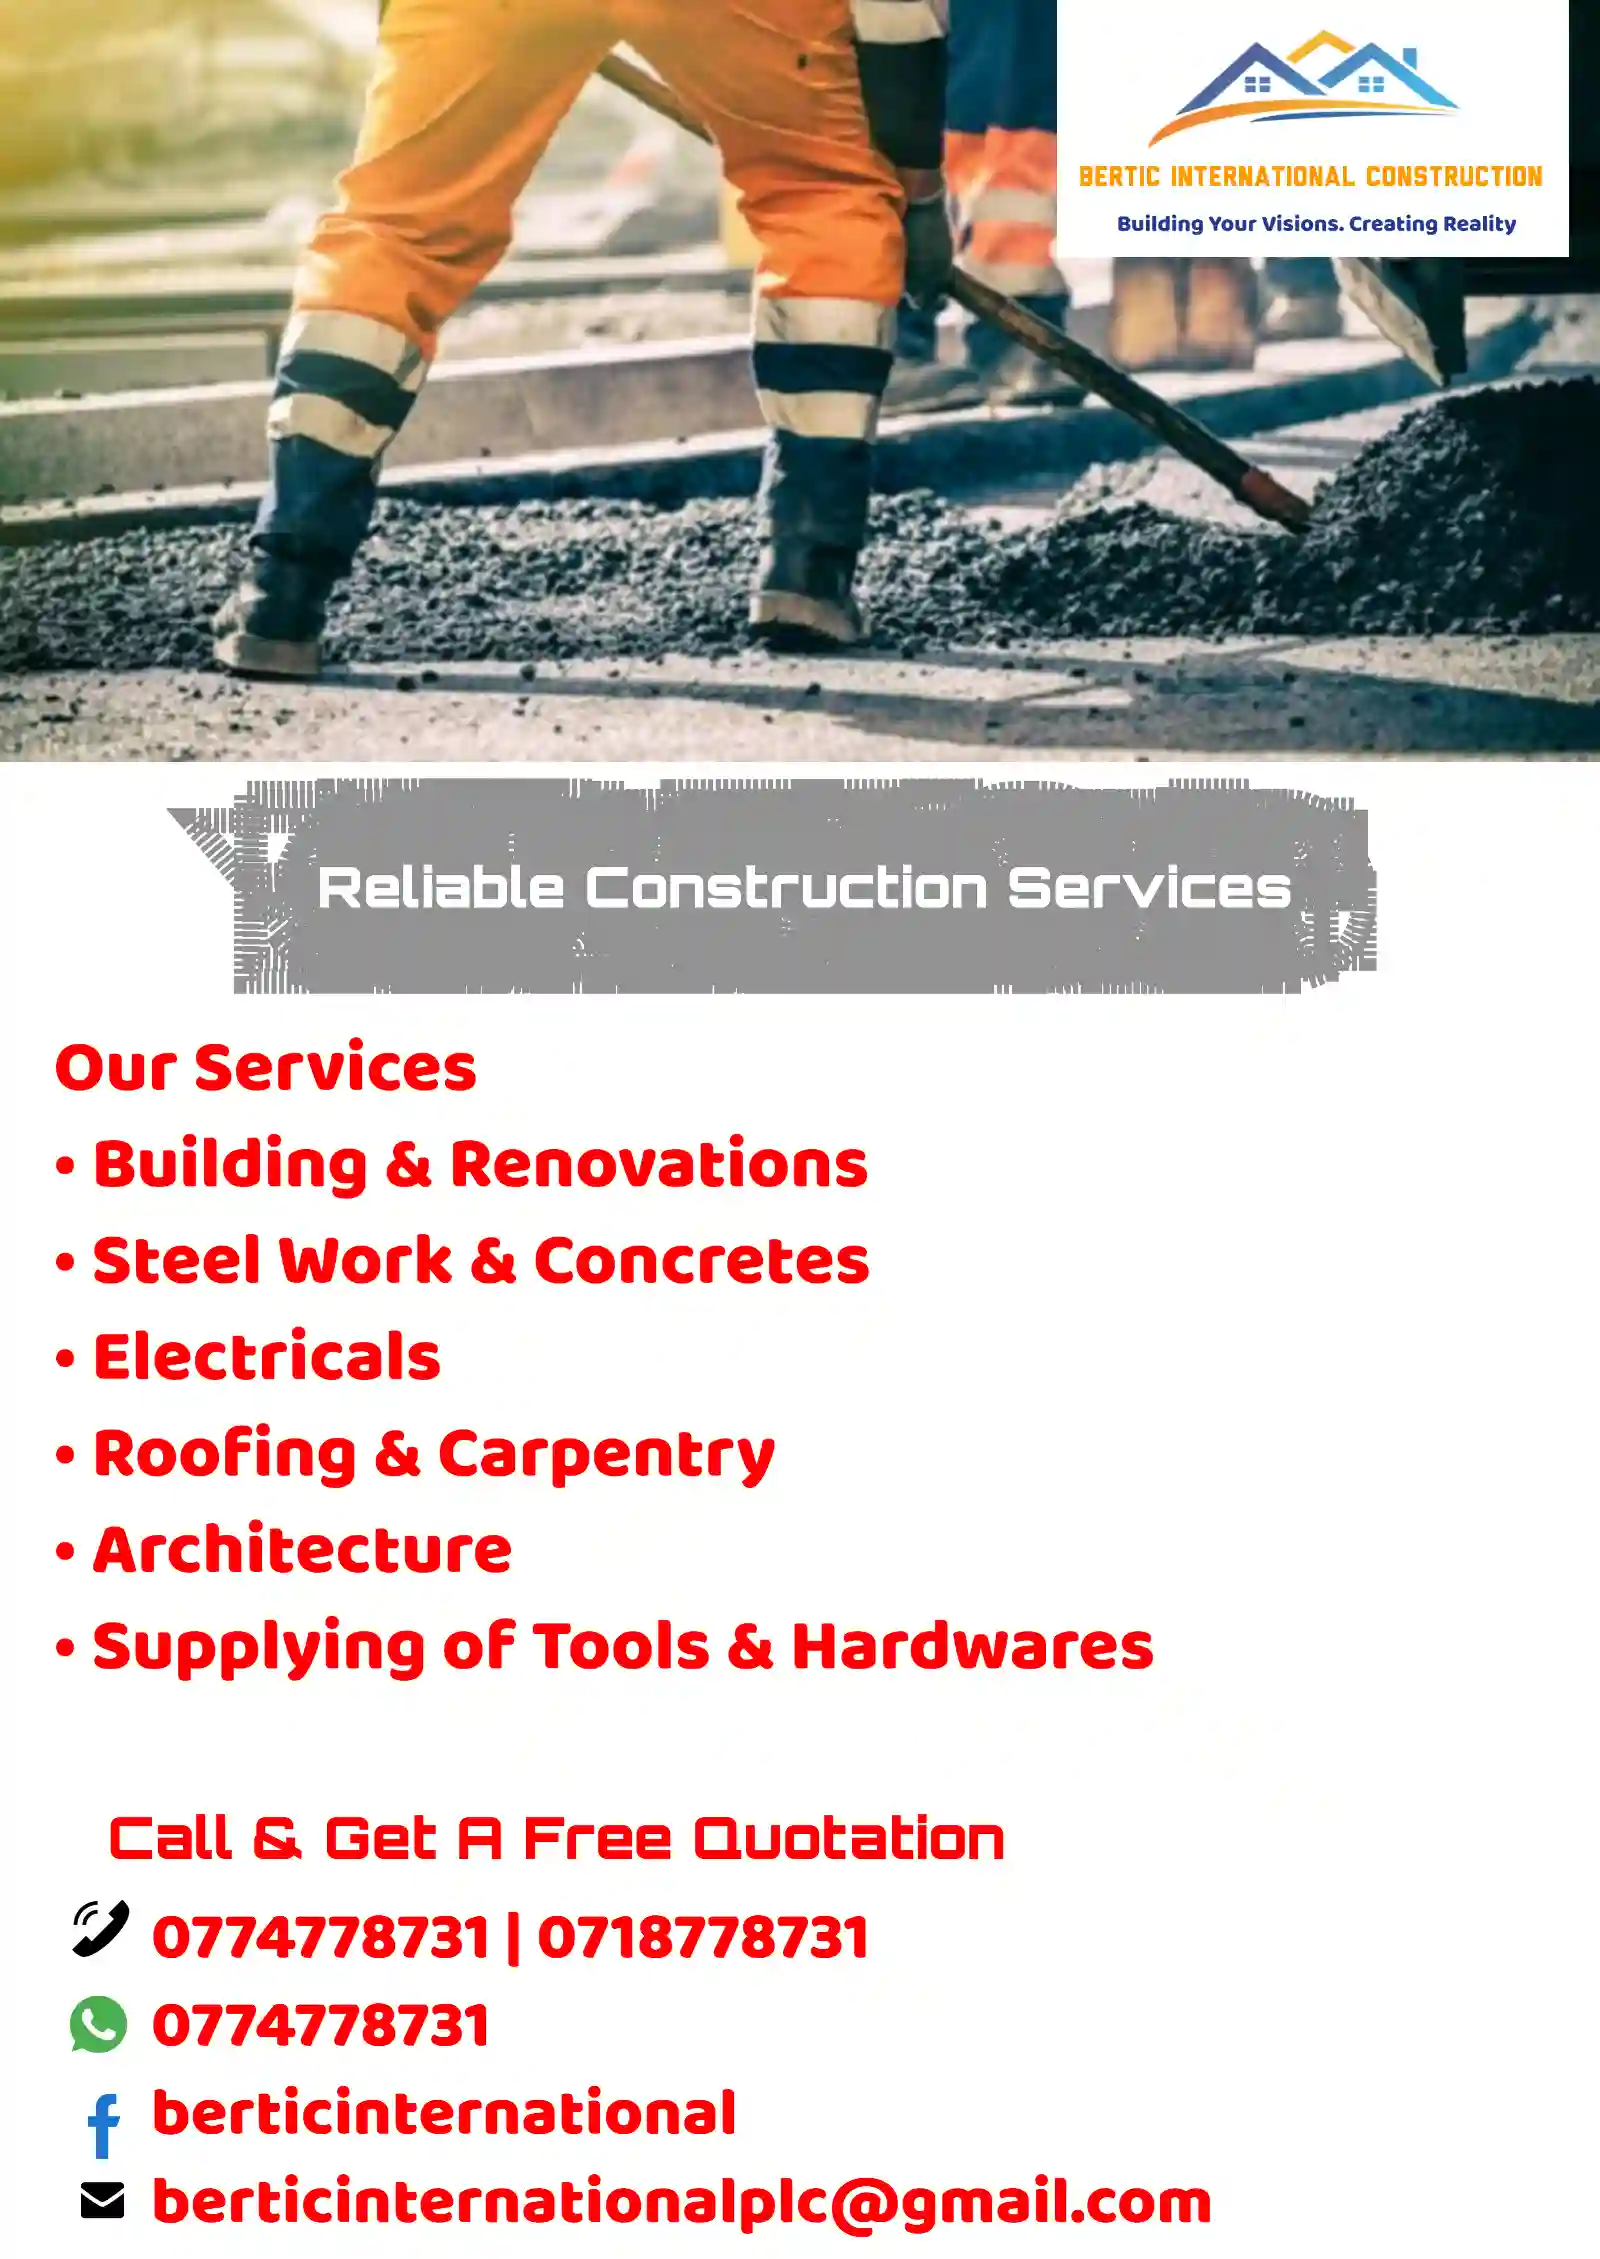 All In One Construction Services